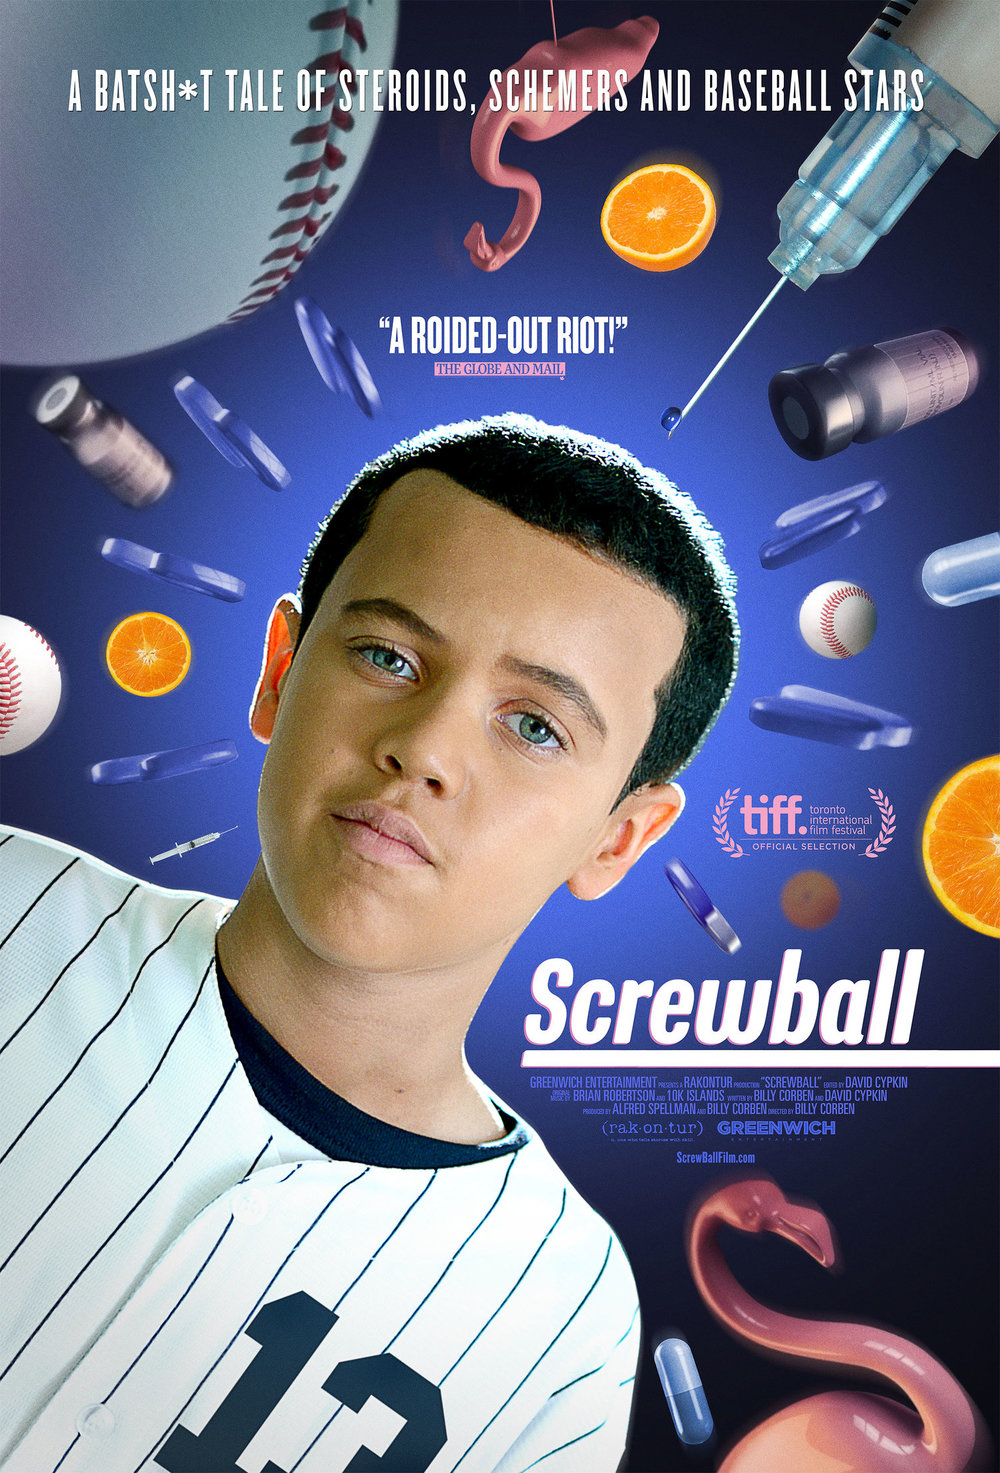 Screwball: The Batsh+t Tales of Steroids, Schemers and Baseball Stars